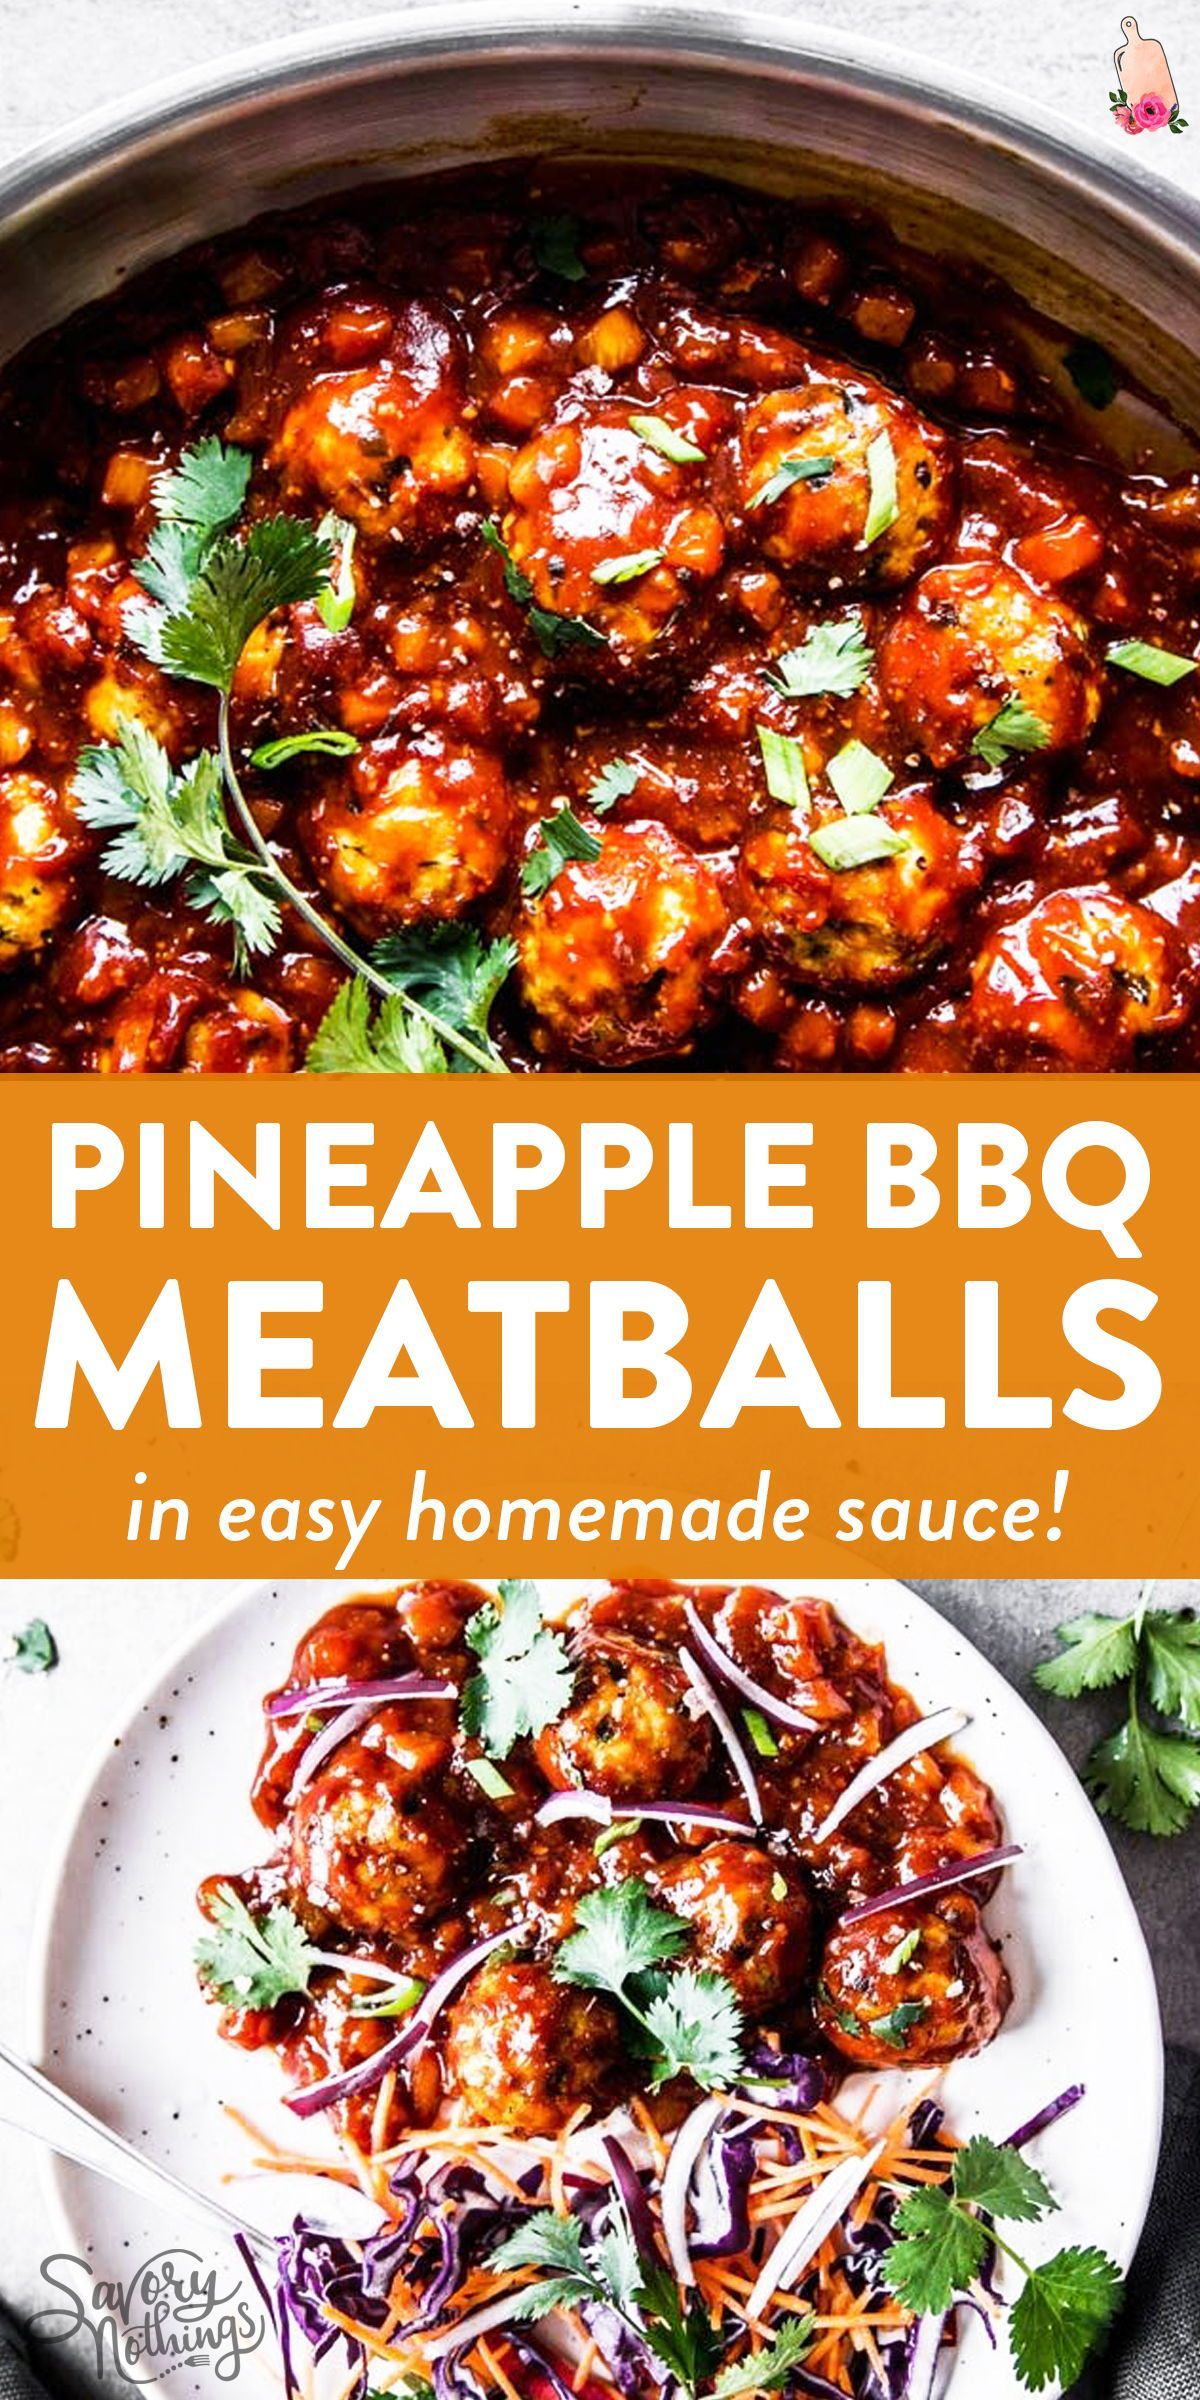 Pineapple BBQ Meatballs - Pineapple BBQ Meatballs -   19 dinner recipes with ground beef healthy ideas